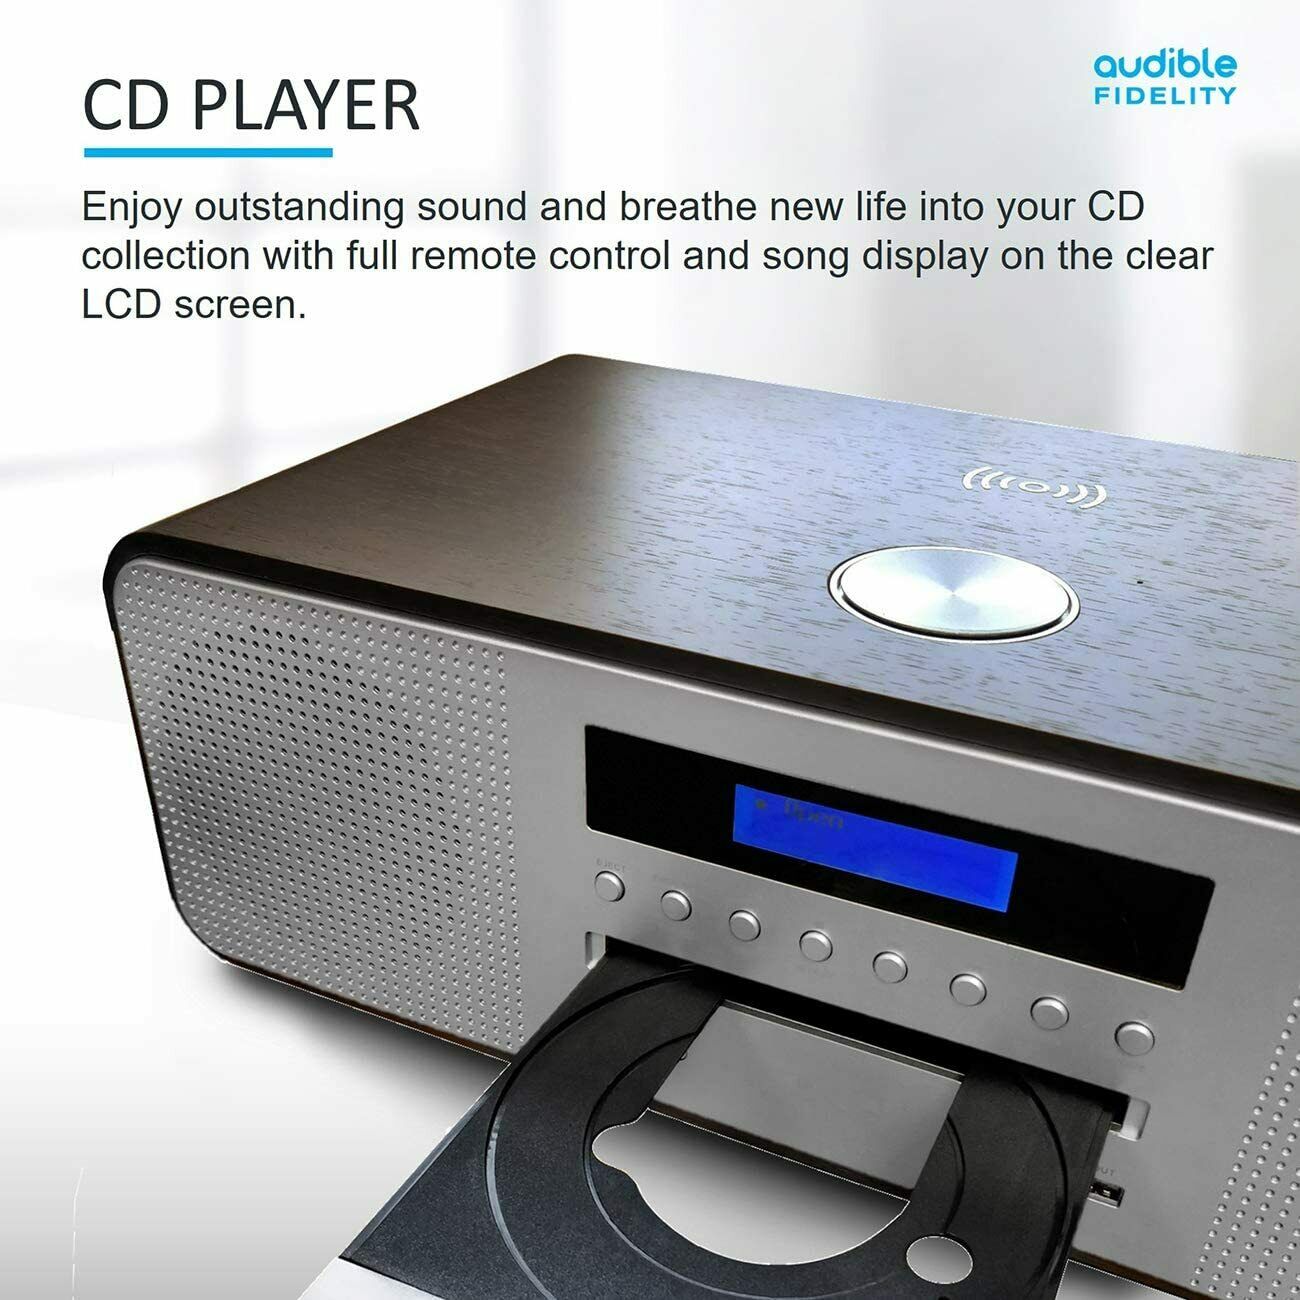 Audible Fidelity Complete Hi-Fi DAB/DAB+ Stereo System CD Player, Brown/Silver